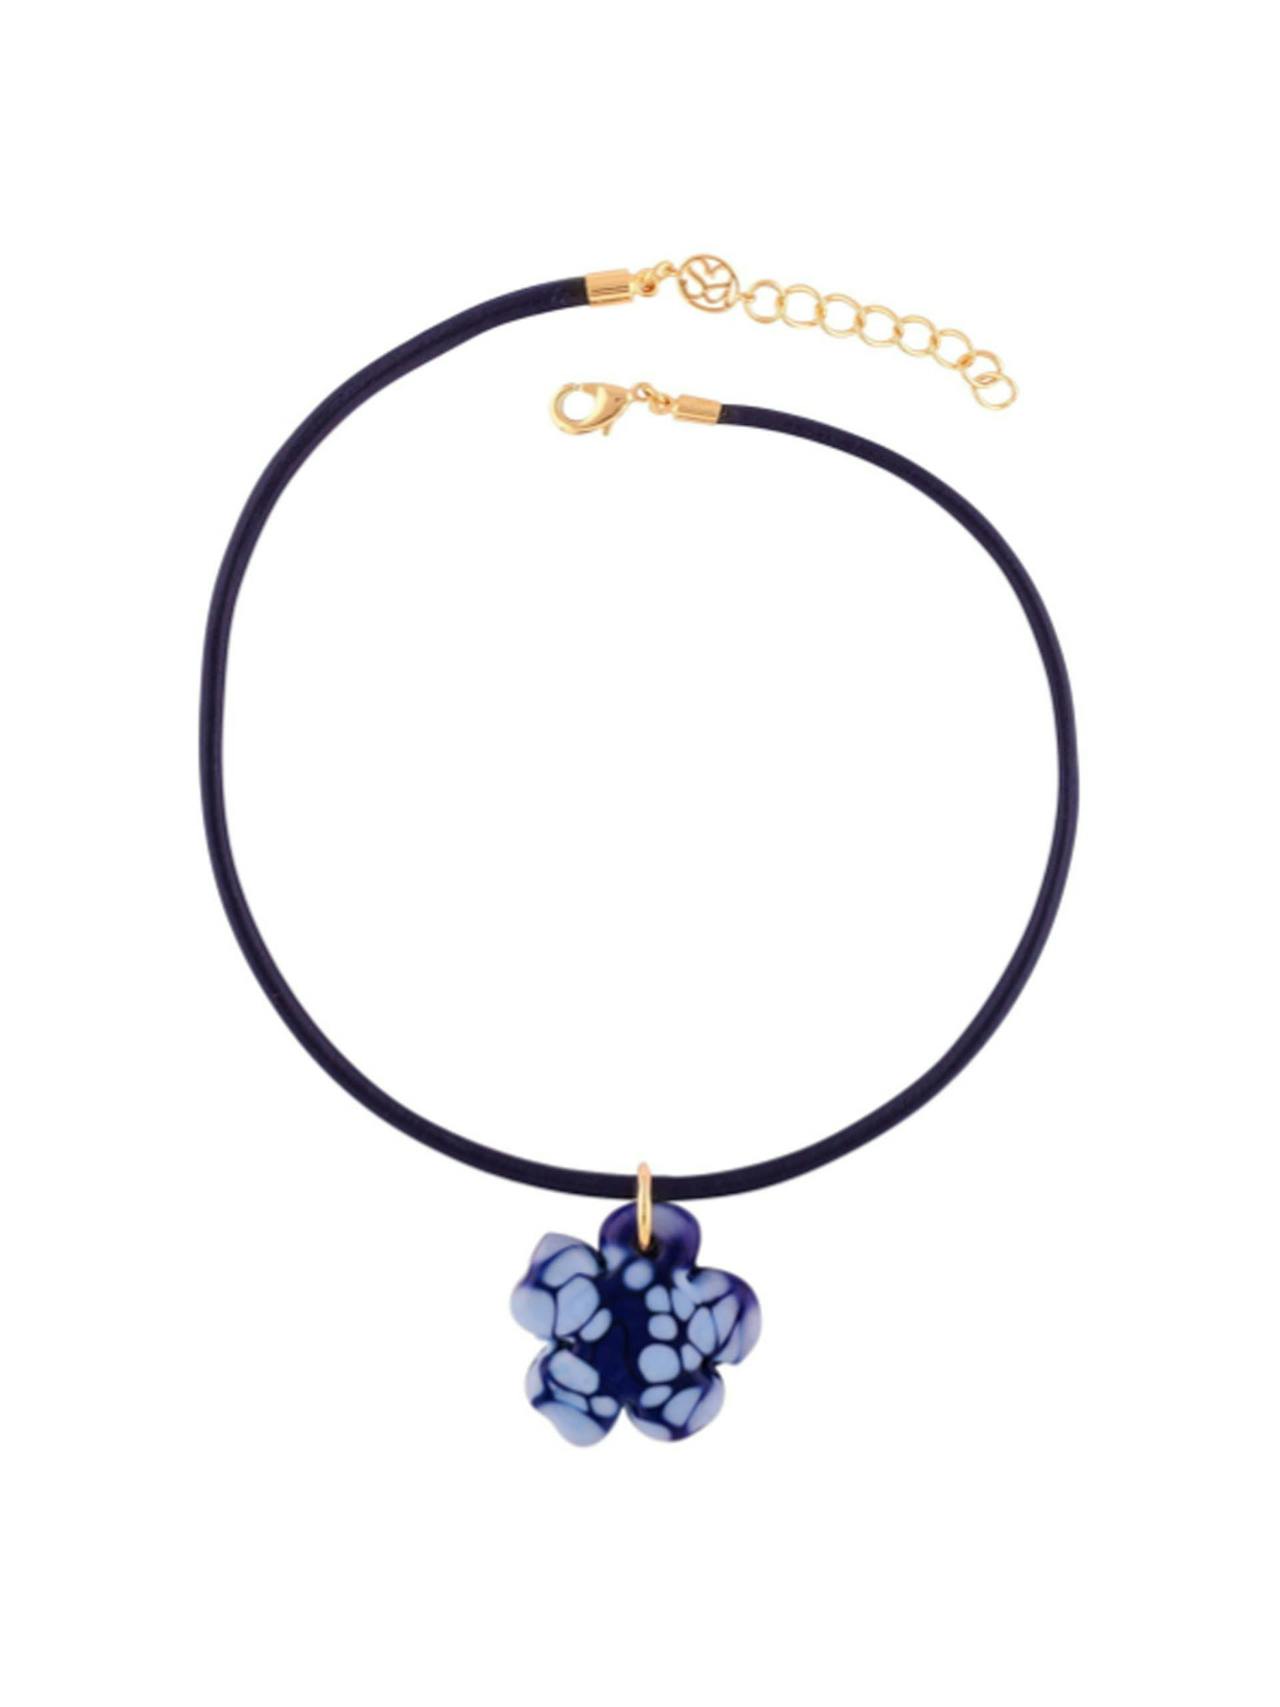 Blue clover leather cord necklace